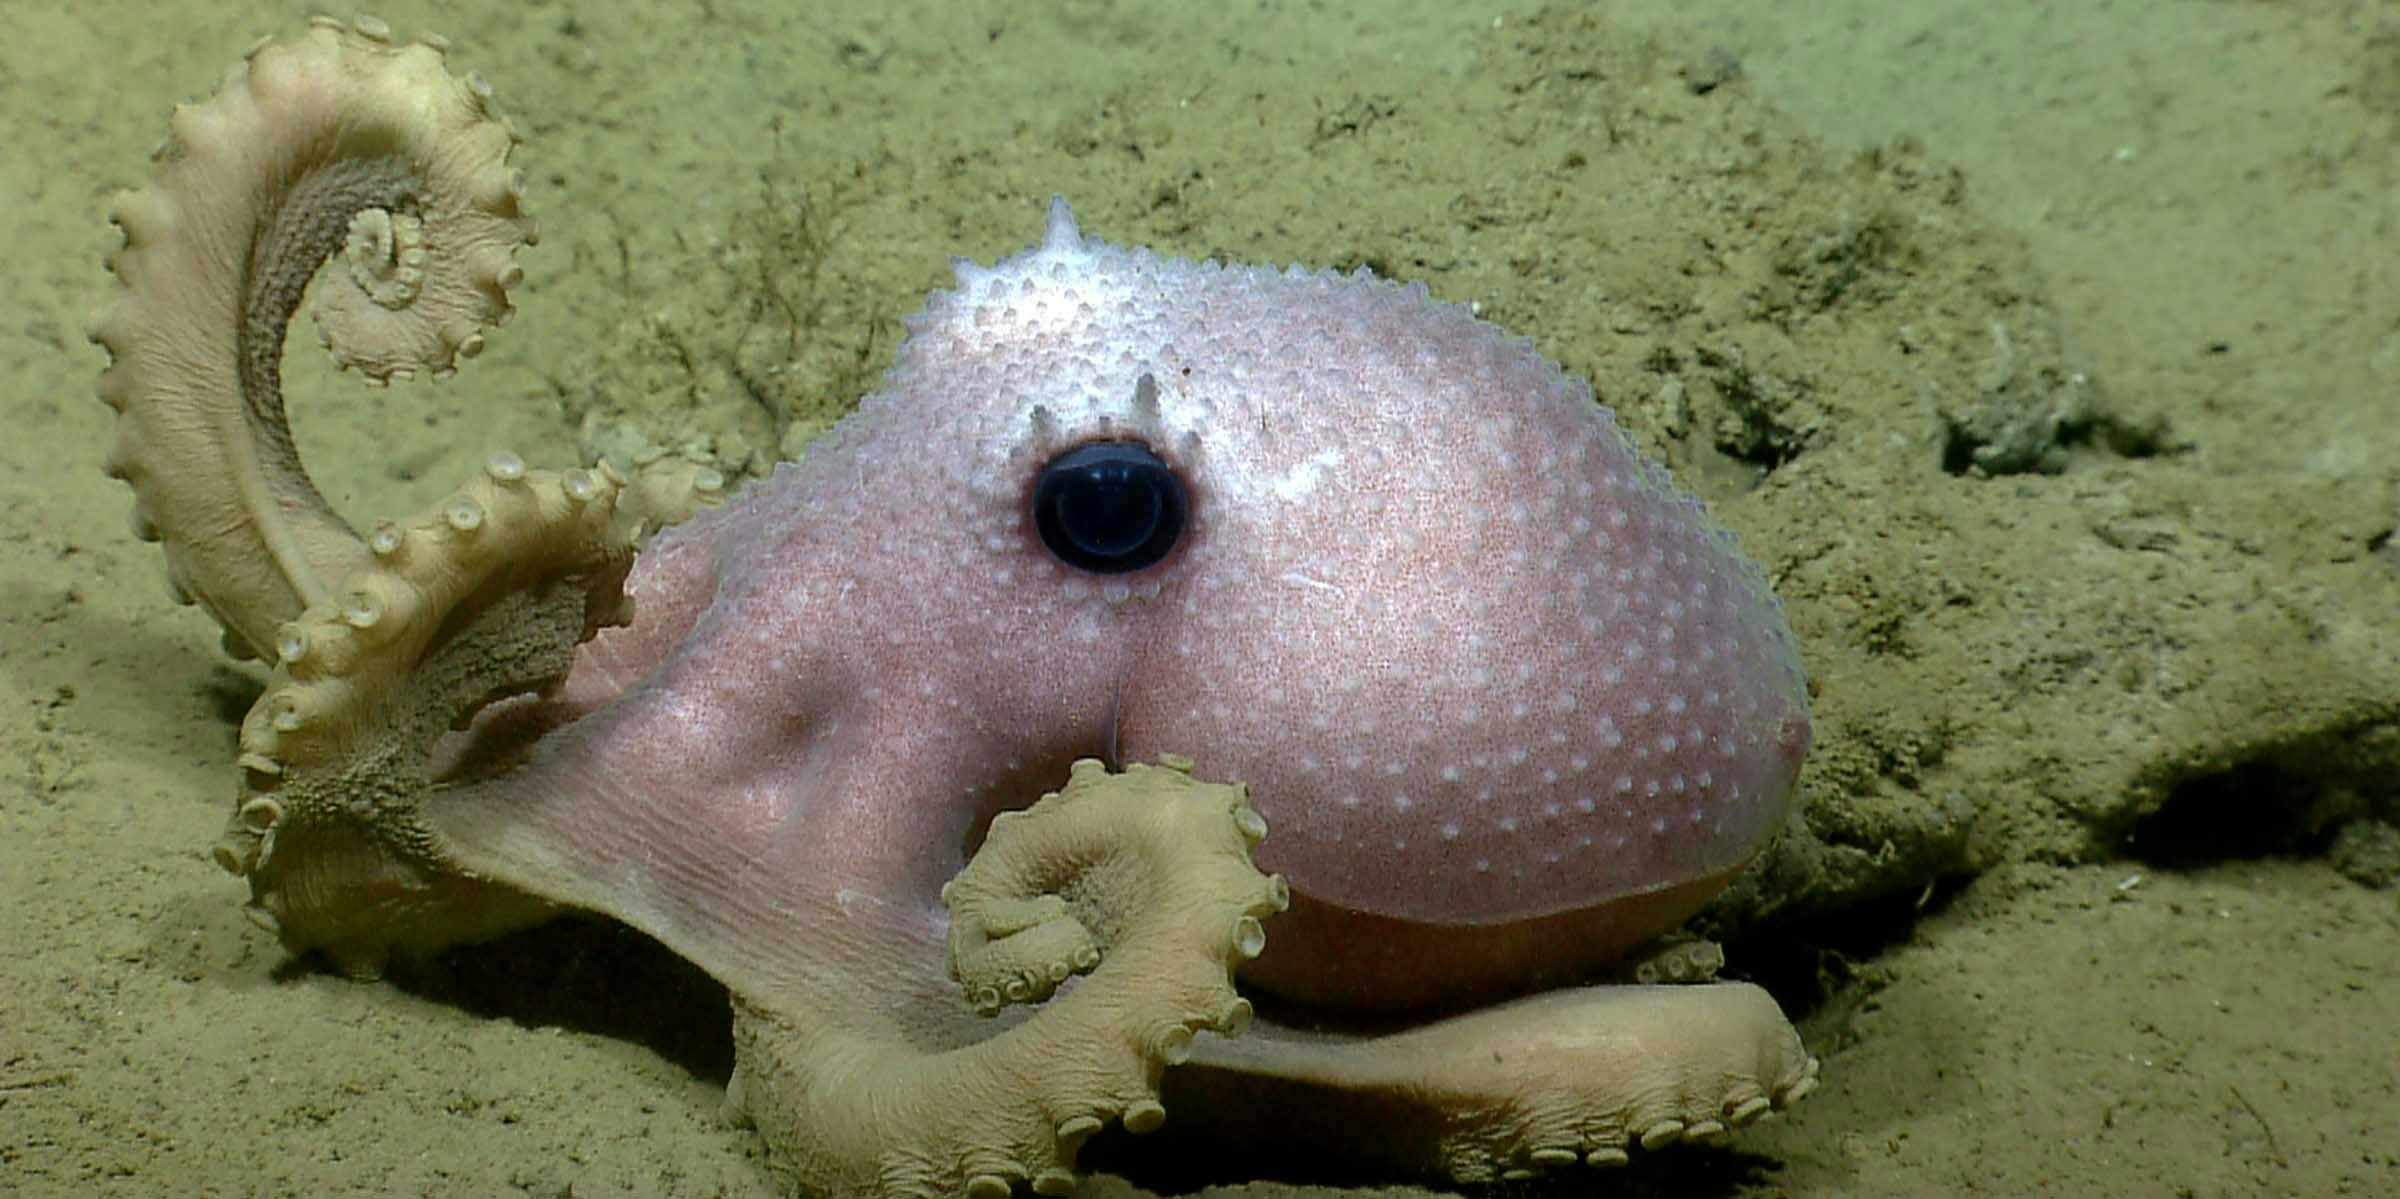 A pinkish purple octopus with a large black eye sitting on the ocean floor, with arms curled